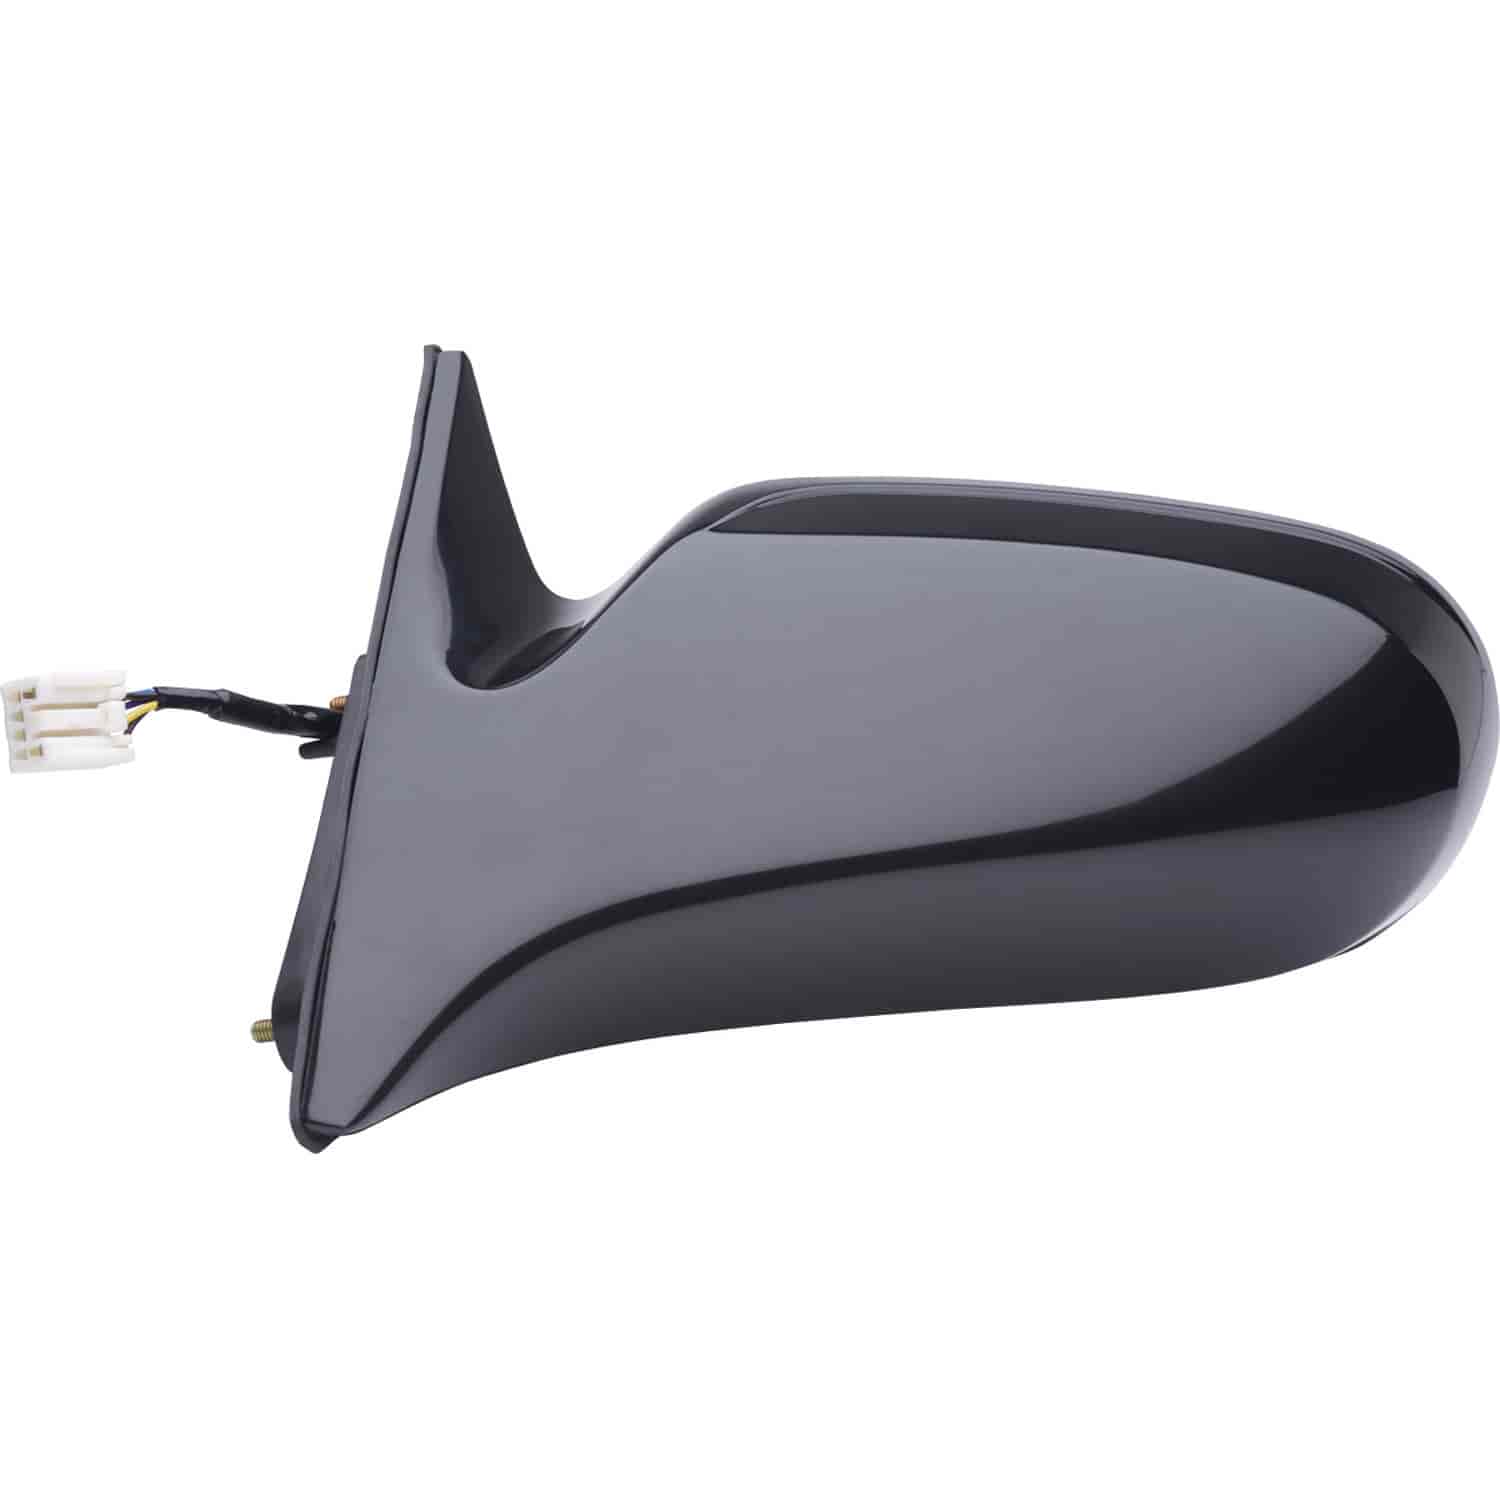 OEM Style Replacement mirror for 00-02 Mazda 626 driver side mirror tested to fit and function like